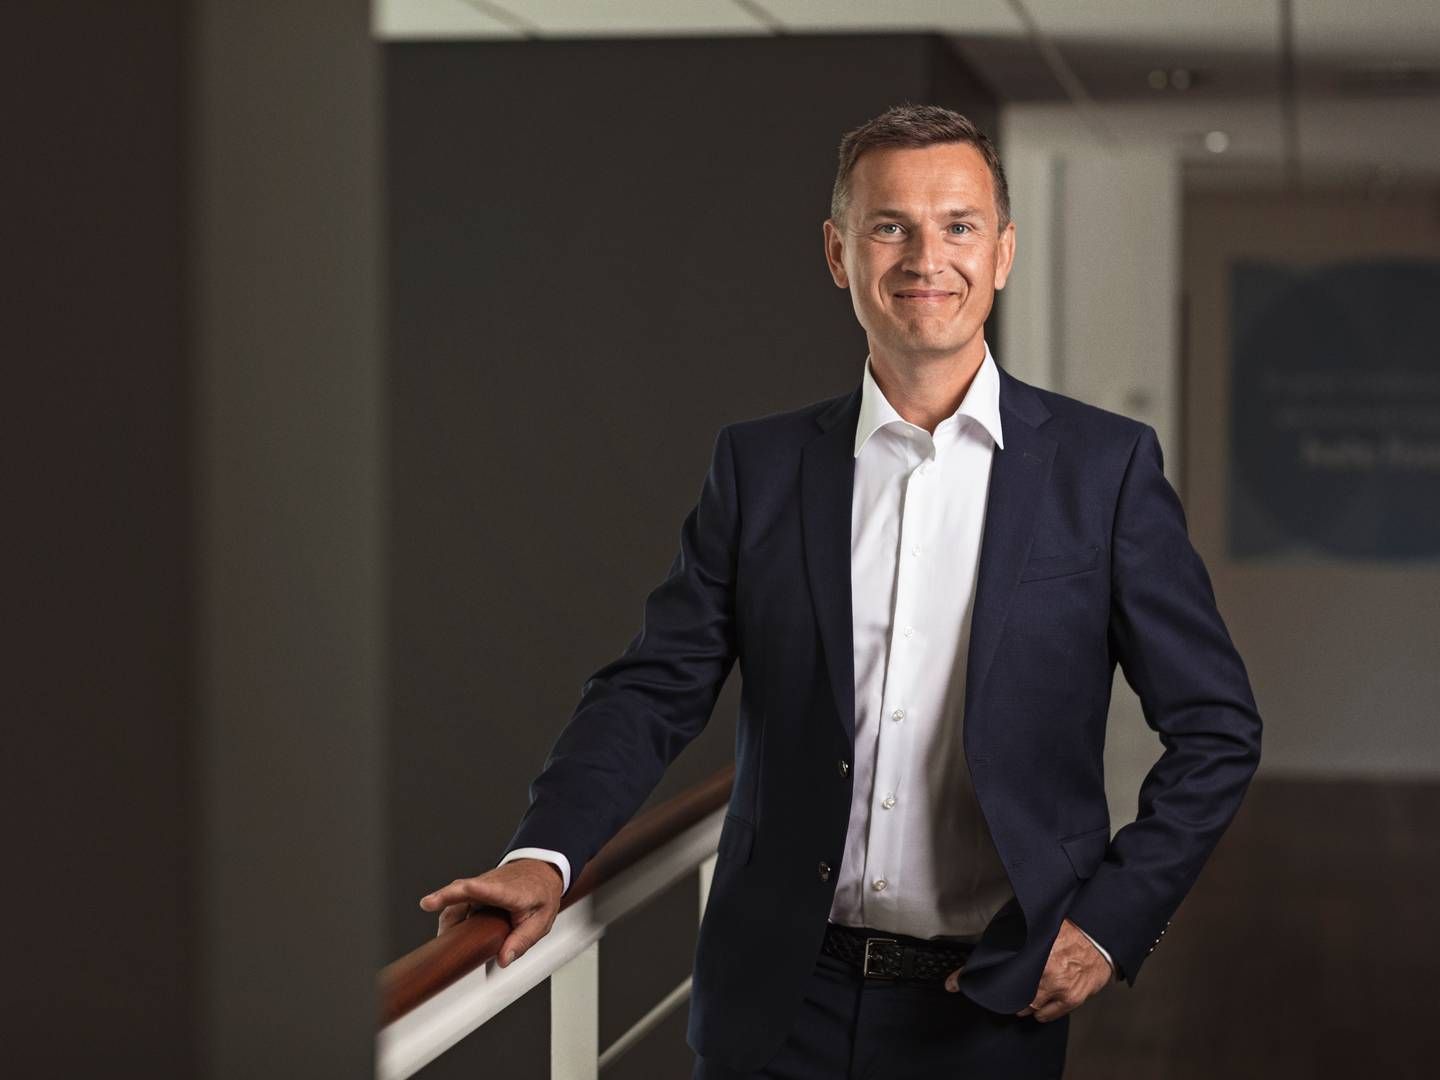 According to CFO of AkademikerPension Anders Achelde, Danske Bank faces a monumental task if the bank's new strategy is to succeed. | Foto: PR/AkademikerPension